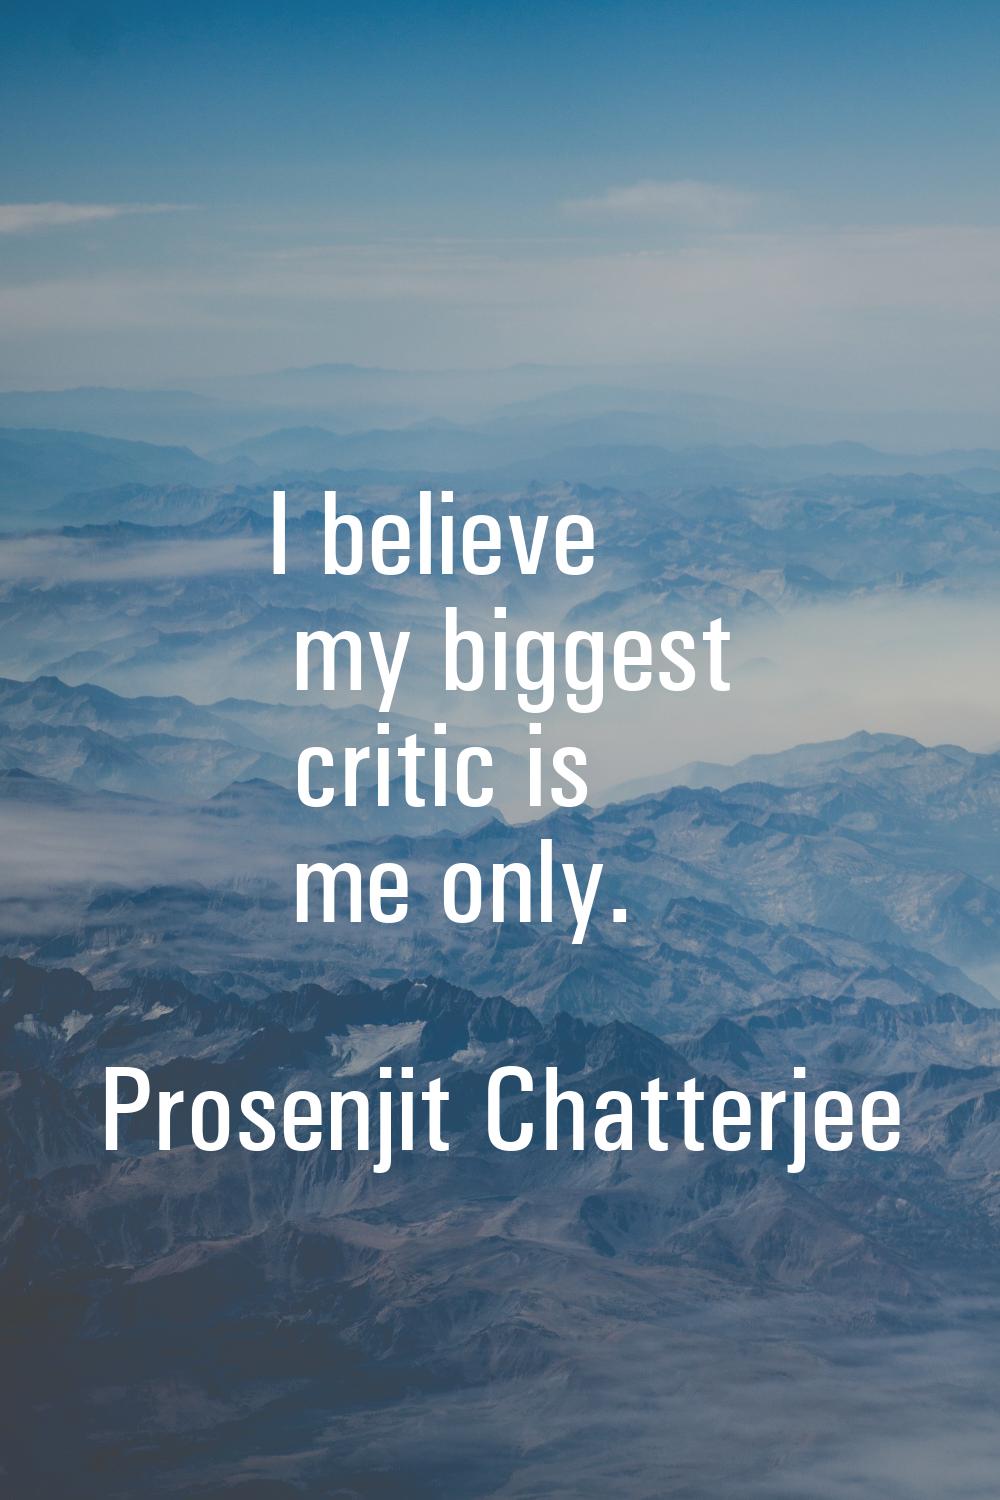 I believe my biggest critic is me only.